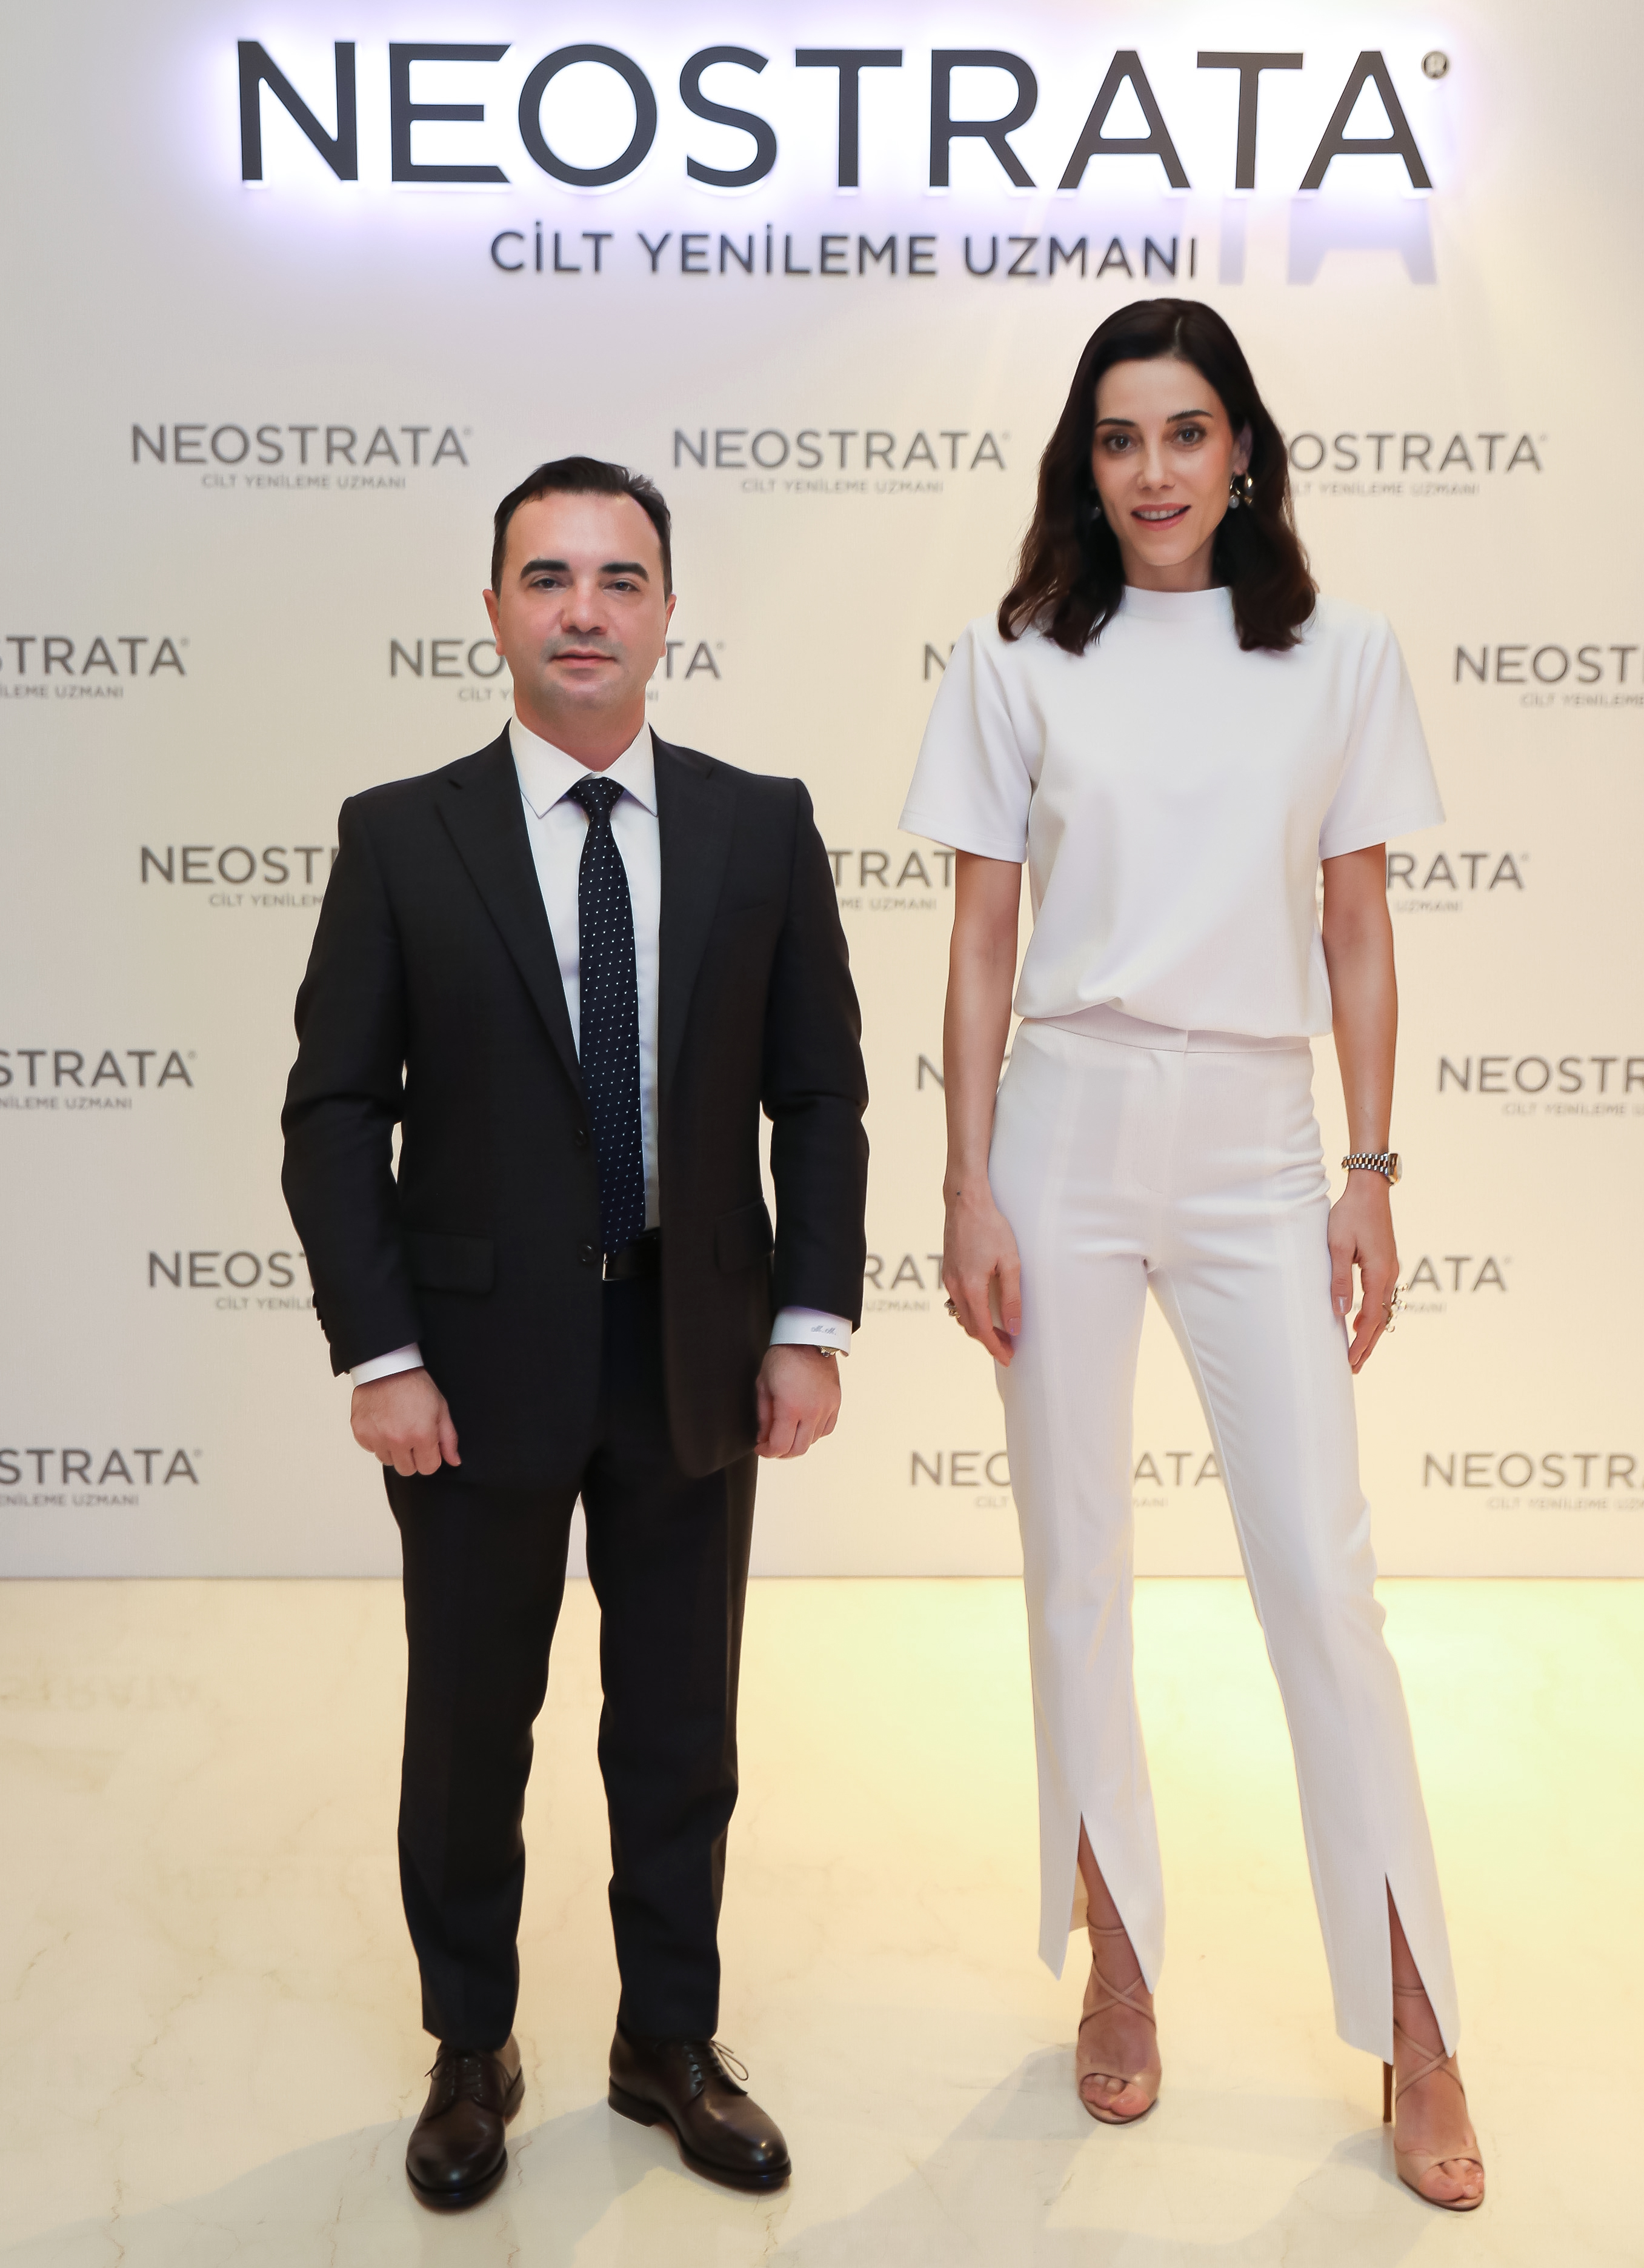 CANSU DERE IS THE BRAND FACE OF SKIN RENOVATION SPECIALIST NEOSTRATA